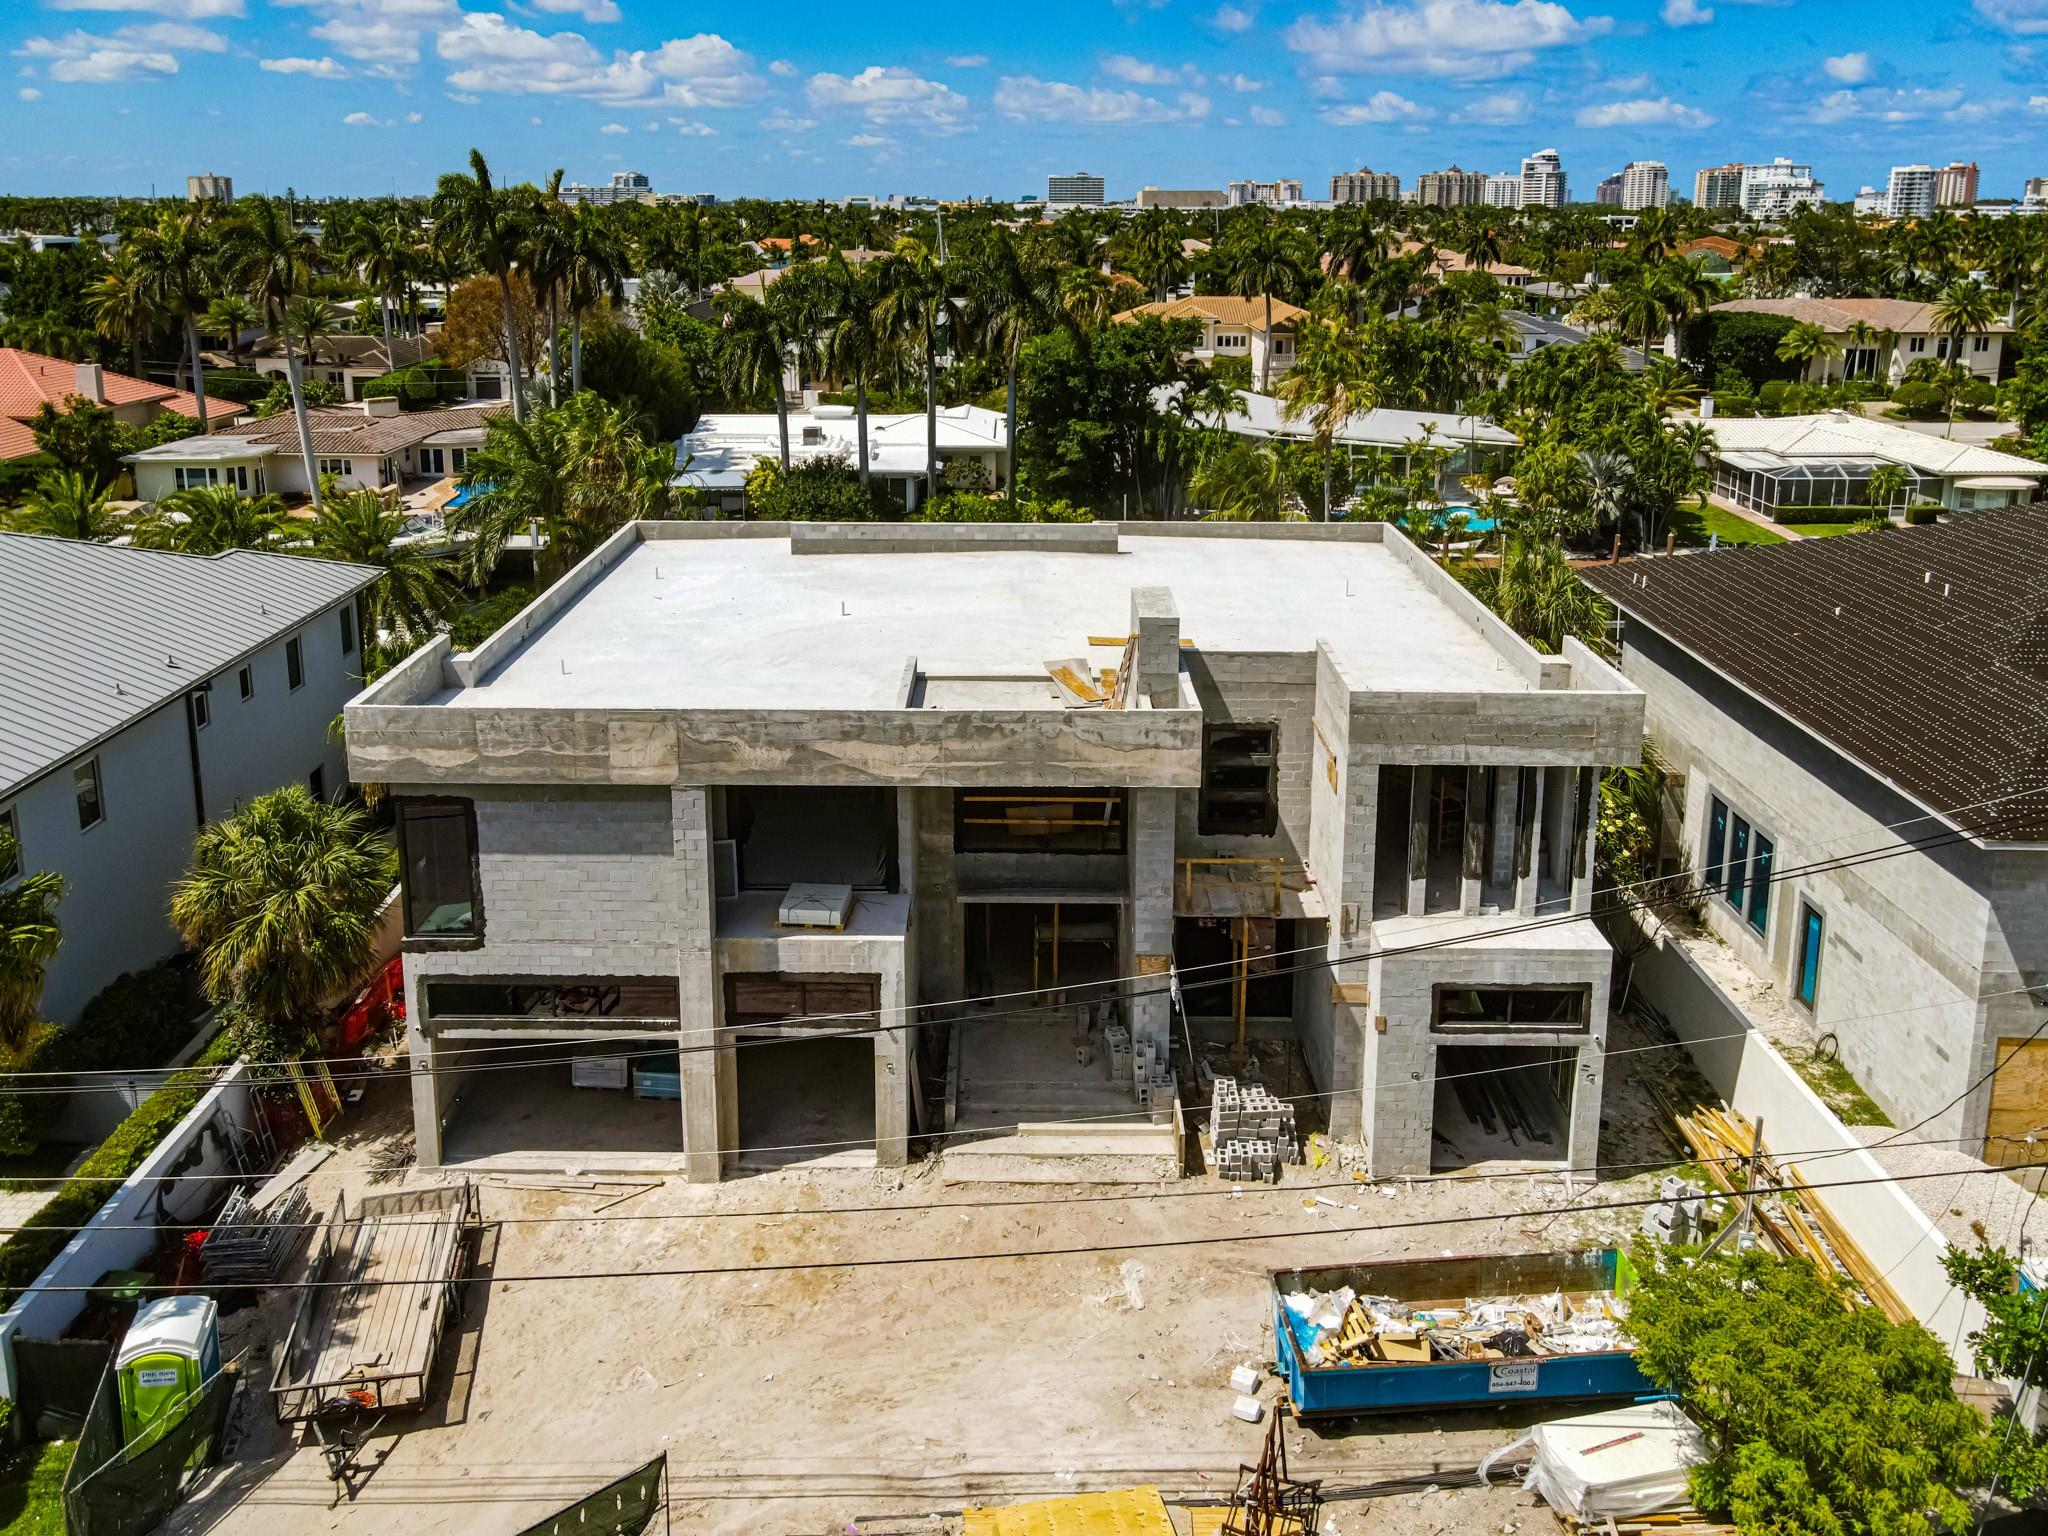 This striking new-construction architect-designed Modern-style waterfront residence near Las Olas is introduced by the grand clear-story entry, with a striking metal-and-glass stairway and a ‘wow-factor’ clear acrylic-sided elevator. Huge windows and doors throughout offer amazing water views, and with 100-feet +/- on the water and a dock, boaters are granted easy access to the Atlantic.

COMPLETION EXPECTED in 6-7 months.  Interior drywall being installed now.  Custom cabinets, Control 4 system for Electric and Audio Visual.  Amazing custom finishes and priced to sell.  Buy NOW and pick your colors.

Please see the Supplement Remarks section for full description.  Plan subject to change.  Please verify final plans and specs. An elegant cosmopolitan ambience is achieved in this spectacular Modern-style seven-bedroom masterpiece, with 8,999 +/- total square feet. Astutely designed by Michael Sher of Symcon Development / Logic Builders Inc, this new-construction residence will be ready for occupancy in 2024. Creating an immediate impactful allure, the grand clear-story entry, which incorporates a striking metal-and-glass stairway and a ‘wow-factor’ clear-acrylic-sided commercial elevator, flows into the open-floor-plan main living areas. These include a great room, dining area, and morning room, all organized around the gourmet kitchen, a convenient layout for easy service when entertaining. Beautifully conceived details throughout include huge impact-glass doors and windows offering spectacular water views, high ceiling heights, and large-format porcelain tile flooring. The center-island kitchen, sure to satisfy the chef, is finished with sleek European-style cabinetry, white-quartz counters and backsplash and stainless-steel professional-grade appliances. A second island/breakfast bar is especially useful, as it can accommodate pull-up seating for five for informal dining. All about water views, the main living areas and the VIP guest bedroom suite access the pool patio area. Additional rooms downstairs include a library/den, cabana bath, laundry, staff bedroom suite and a glass-enclosed temperature-controlled wine room. Upstairs the primary suite, three guest suites, and media/ guest bedroom are arranged around a family-entertainment salon, which opens to a water-view balcony. The primary bedroom and a guest suite also open to pool-view balcony and a guest suite accesses a garden-view balcony. The spacious primary suite, which presides over half of the second-floor, comprises two huge walk-in closets, an expansive spa-inspired bathroom and an exercise studio. Completing this luxe residence are two attached garages, and high-end amenities include recessed LED lighting, four-zone HVAC systems, pre-wiring for speakers, salt-water and chlorination pool systems, and a concrete roof.



DISCLAIMER: Information published or otherwise provided by the listing company and its representatives including but not limited to prices, measurements, square footages, lot sizes, calculations, statistics, and videos are deemed reliable but are not guaranteed and are subject to errors, omissions or changes without notice. All such information should be independently verified by any prospective purchaser or seller. Parties should perform their own due diligence to verify such information prior to a sale or listing. Listing company expressly disclaims any warranty or representation regarding such information. Prices published are either list price, sold price, and/or last asking price. The listing company participates in the Multiple Listing Service and IDX. The properties published as listed and sold are not necessarily exclusive to listing company and may be listed or have sold with other members of the Multiple Listing Service. Transactions where listing company represented both buyers and sellers are calculated as two sales. The listing company’s marketplace is all of the following: Fort Lauderdale, Deerfield Beach, Hillsboro Beach, Hillsboro Shores, East Pompano Beach, Lighthouse Point, Sea Ranch Lakes Vero Beach, Town of Orchid, Indian River Shores, Town of Palm Beach, West Palm Beach, Manalapan Beach, Point Manalapan, Hypoluxo Island, Ocean Ridge, Gulf Stream, Delray Beach, Highland Beach, and Boca Raton. Cooperating brokers are advised that in the event of a Buyer default, no financial compensation will be paid to a cooperating Broker on the Deposits retained by the Seller. No financial compensation will be paid to any cooperating broker until title passes or upon actual commencement of a lease. Some affiliations may not be applicable to certain geographic areas. If your property is currently listed with another broker, please disregard any solicitation for services. Copyright 2022 by the listing company. All Rights Reserved.